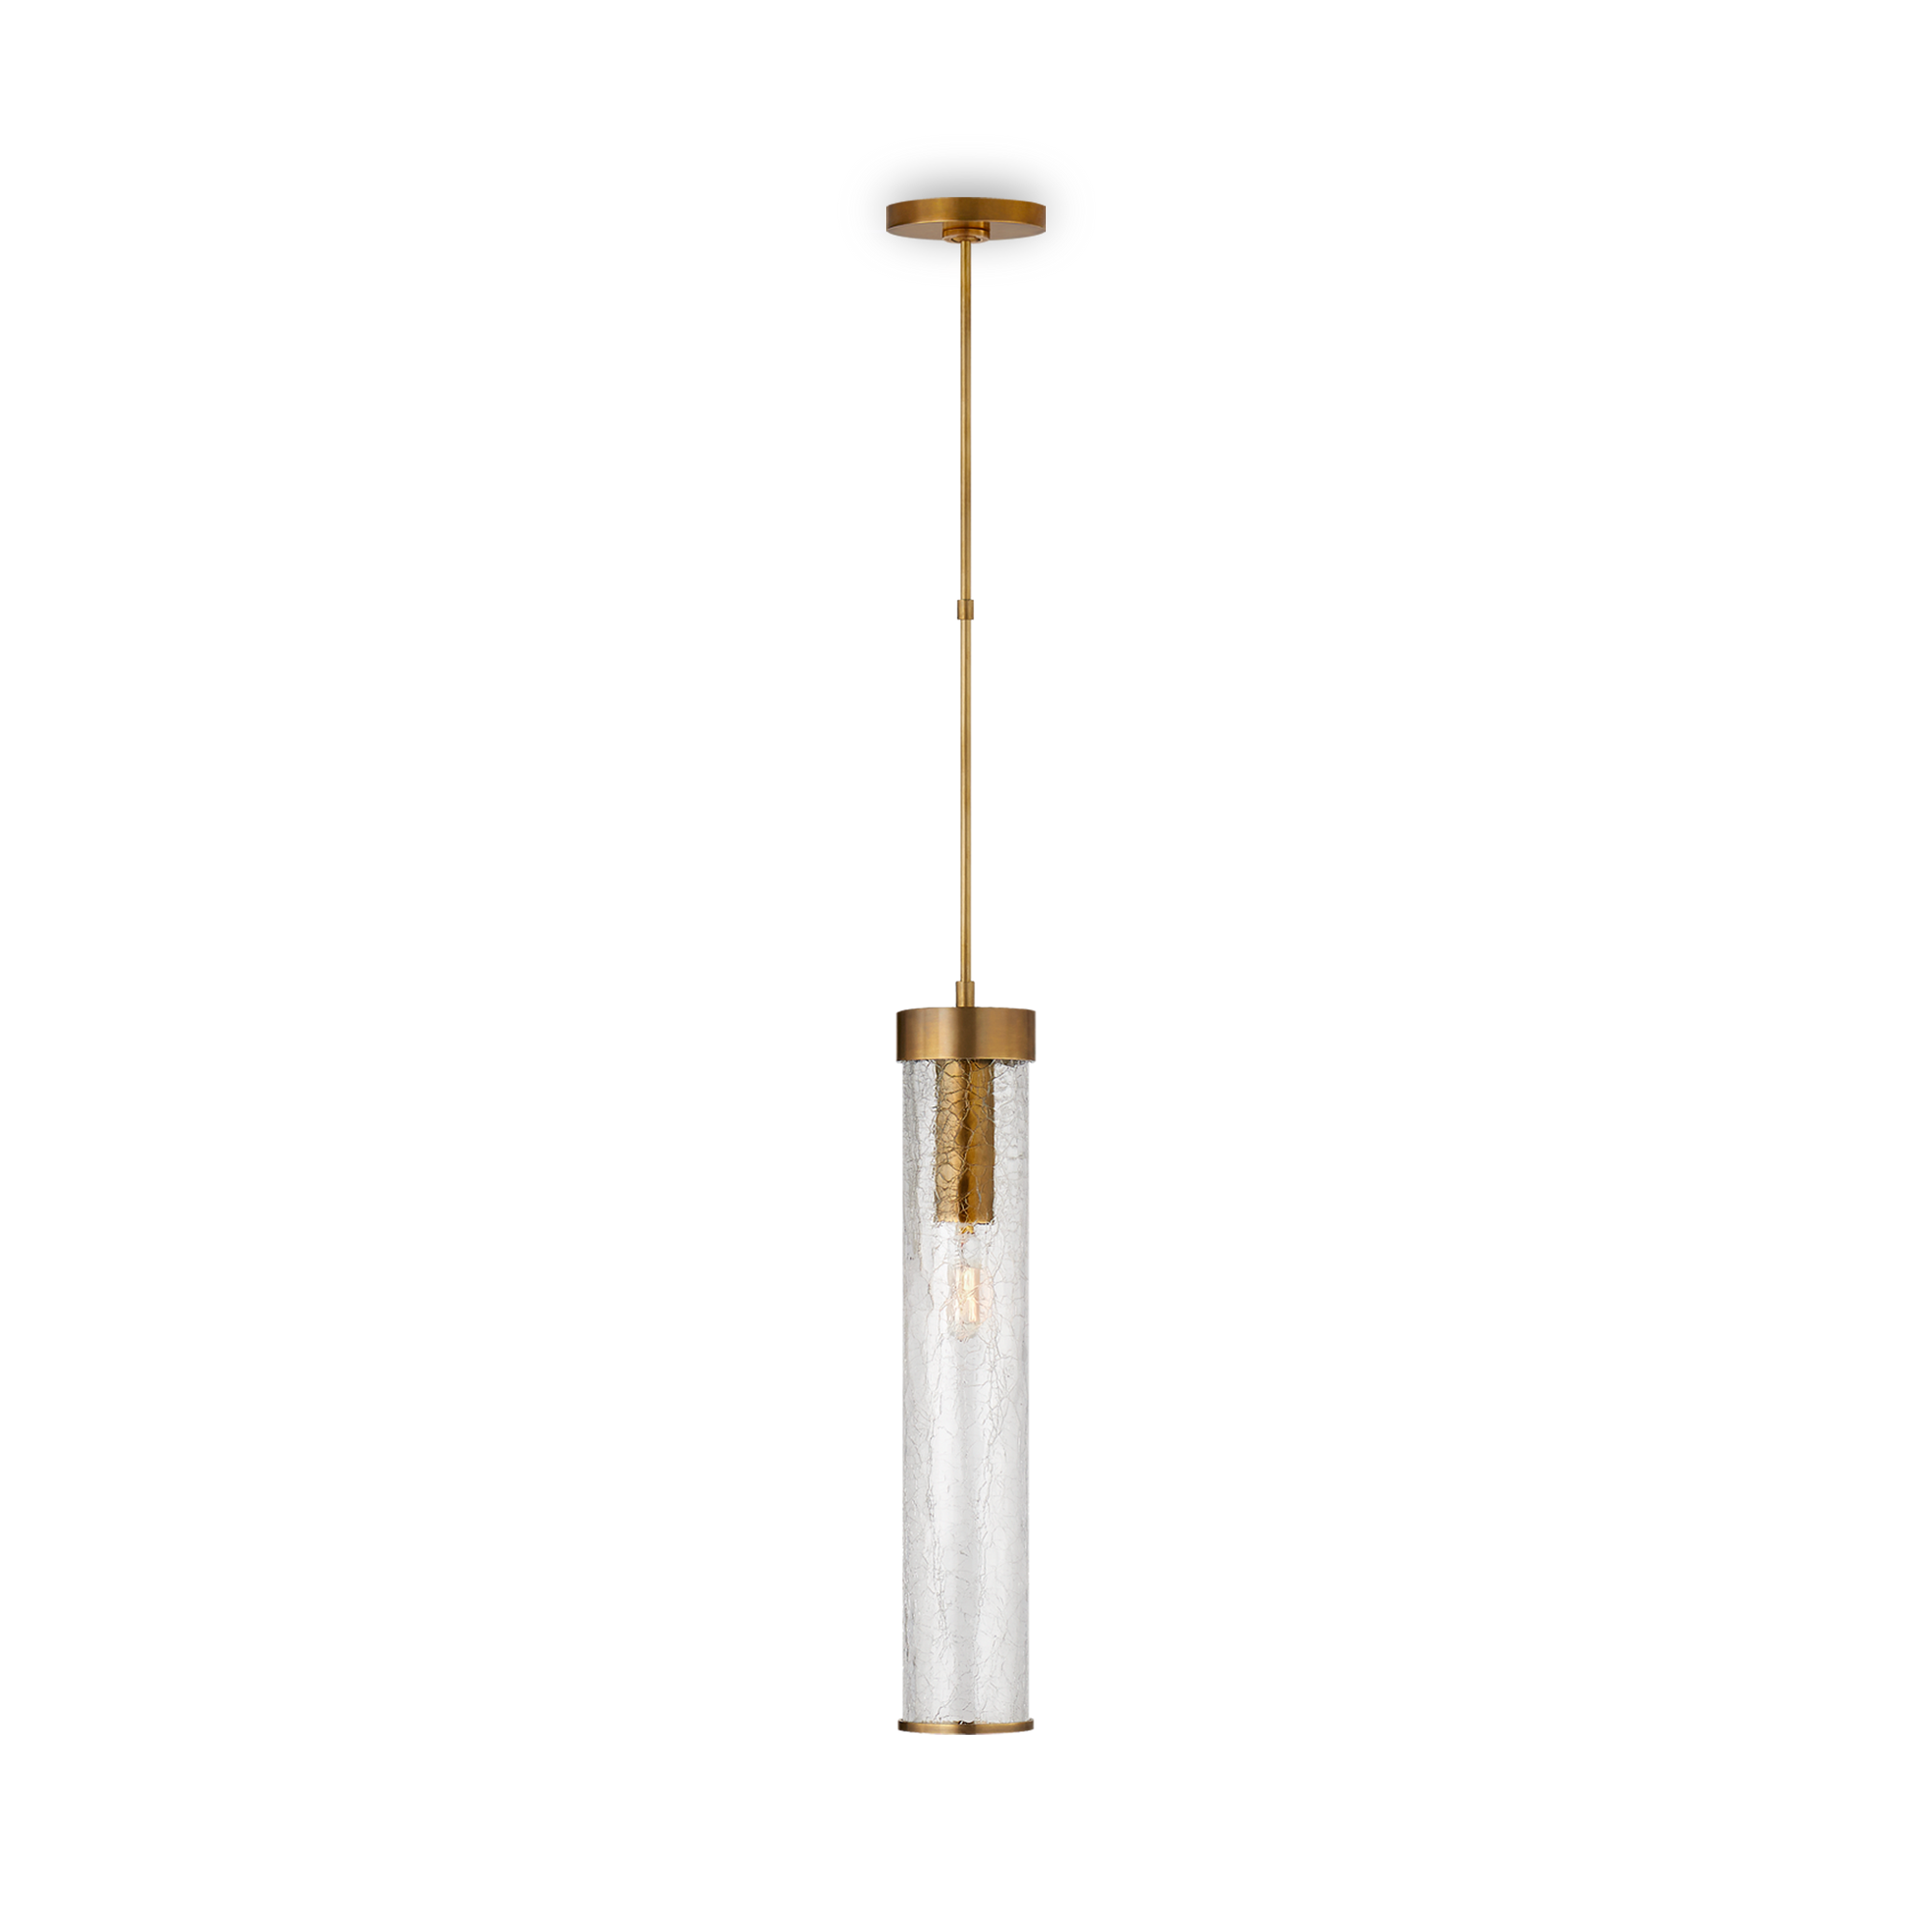 The Liason Long Pendant features a distinctive design and soulful vibe.